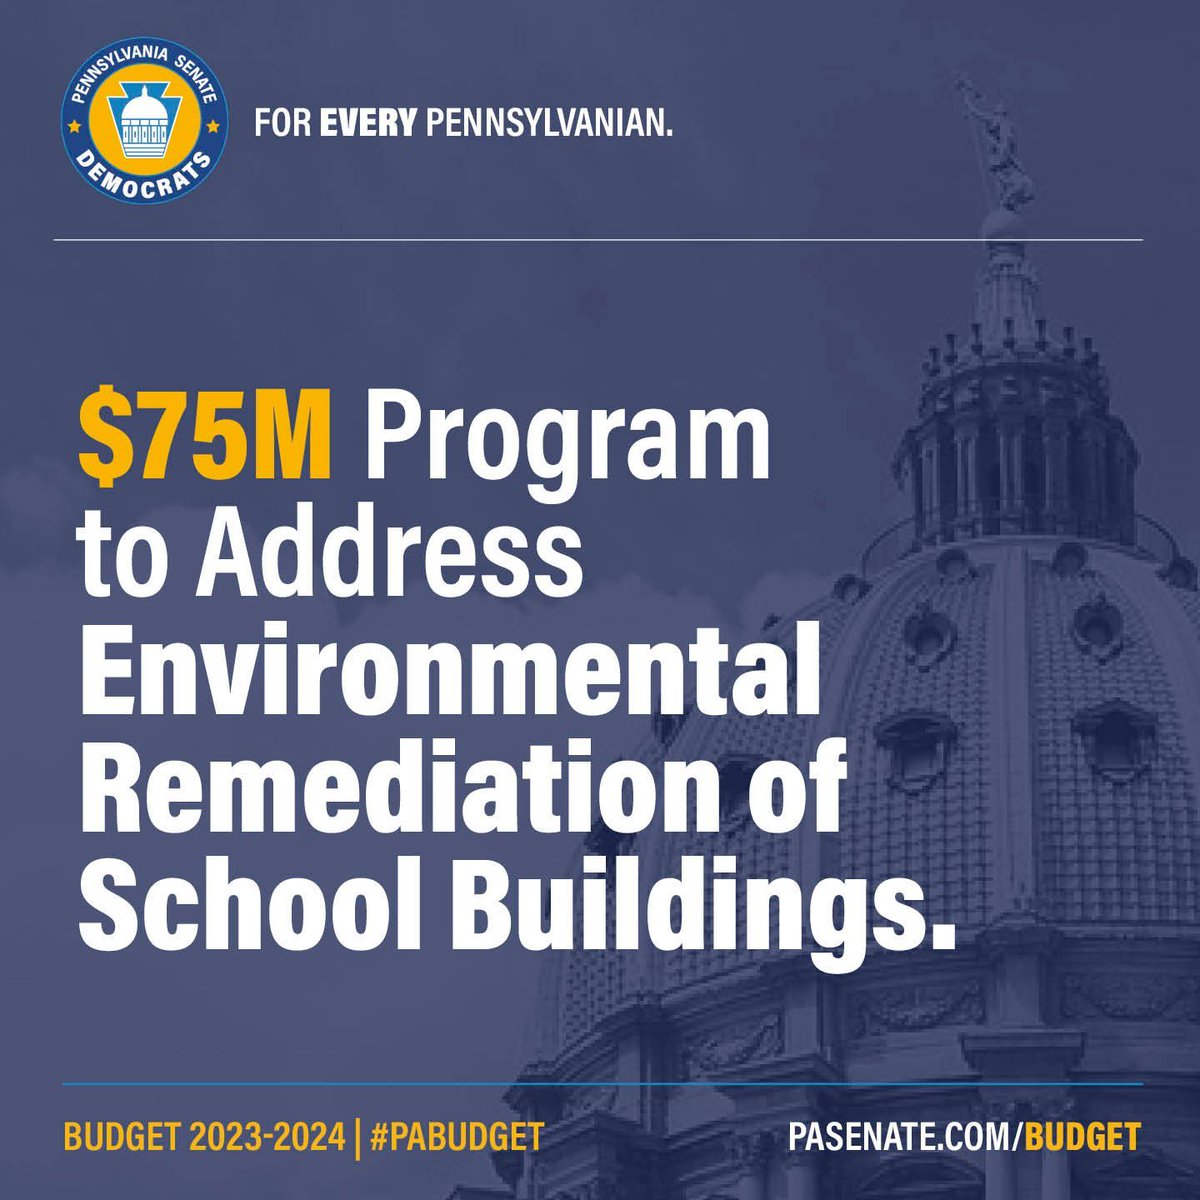 As a part of this year's code bills, we secured $75 million to deal with lead, mold, asbestos, and other environmental hazards in school buildings across PA. I'm so proud our caucus fought for dollars to ensure our educators, staff, and students are safe every day.